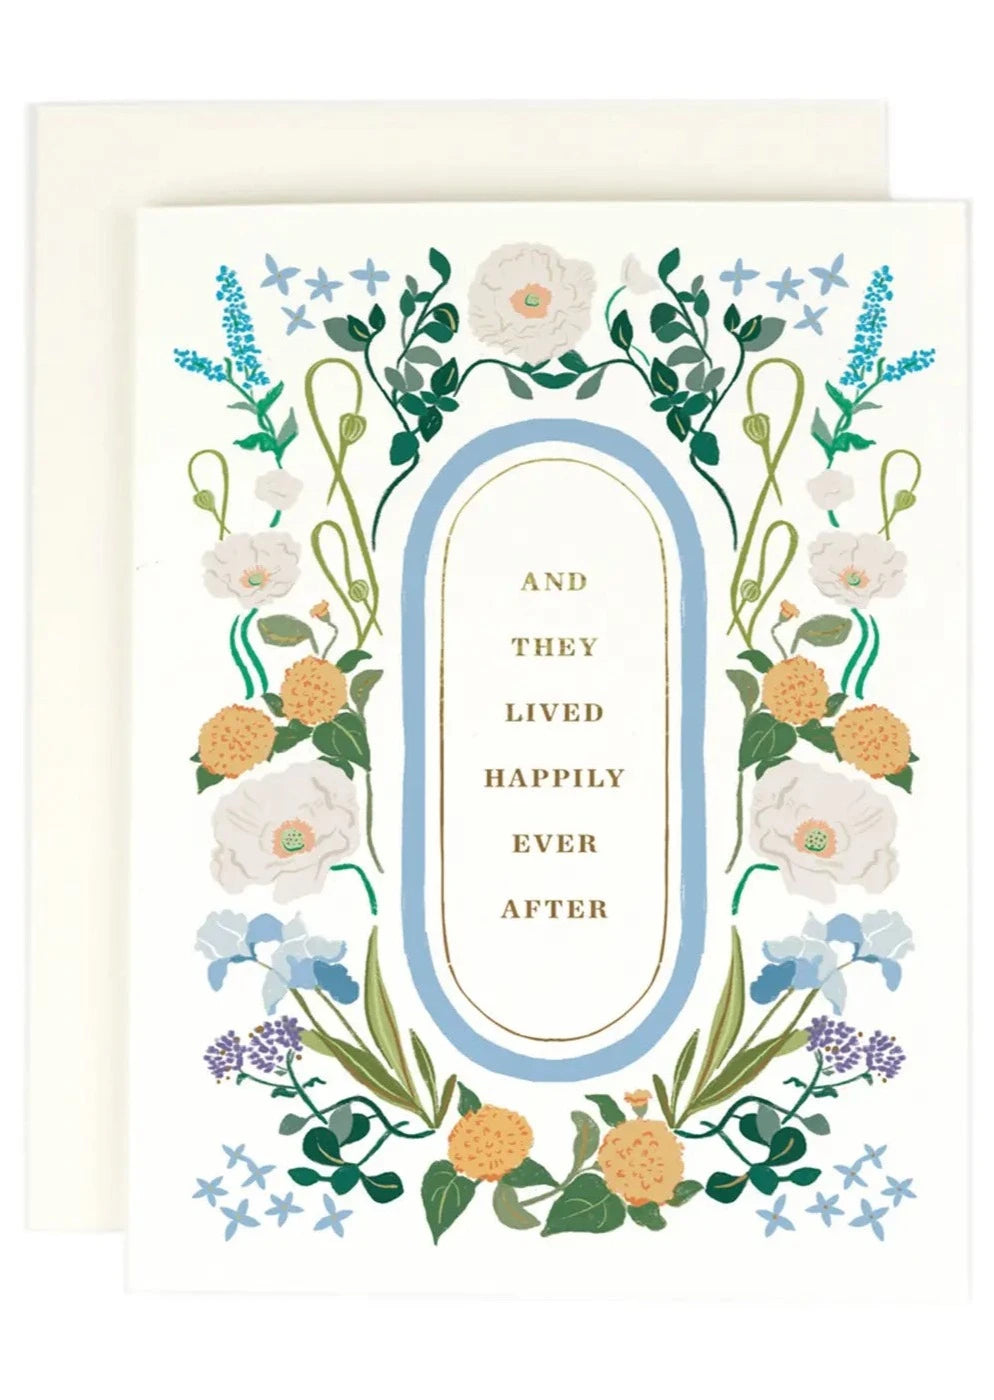 Happily Ever After Card - Floral